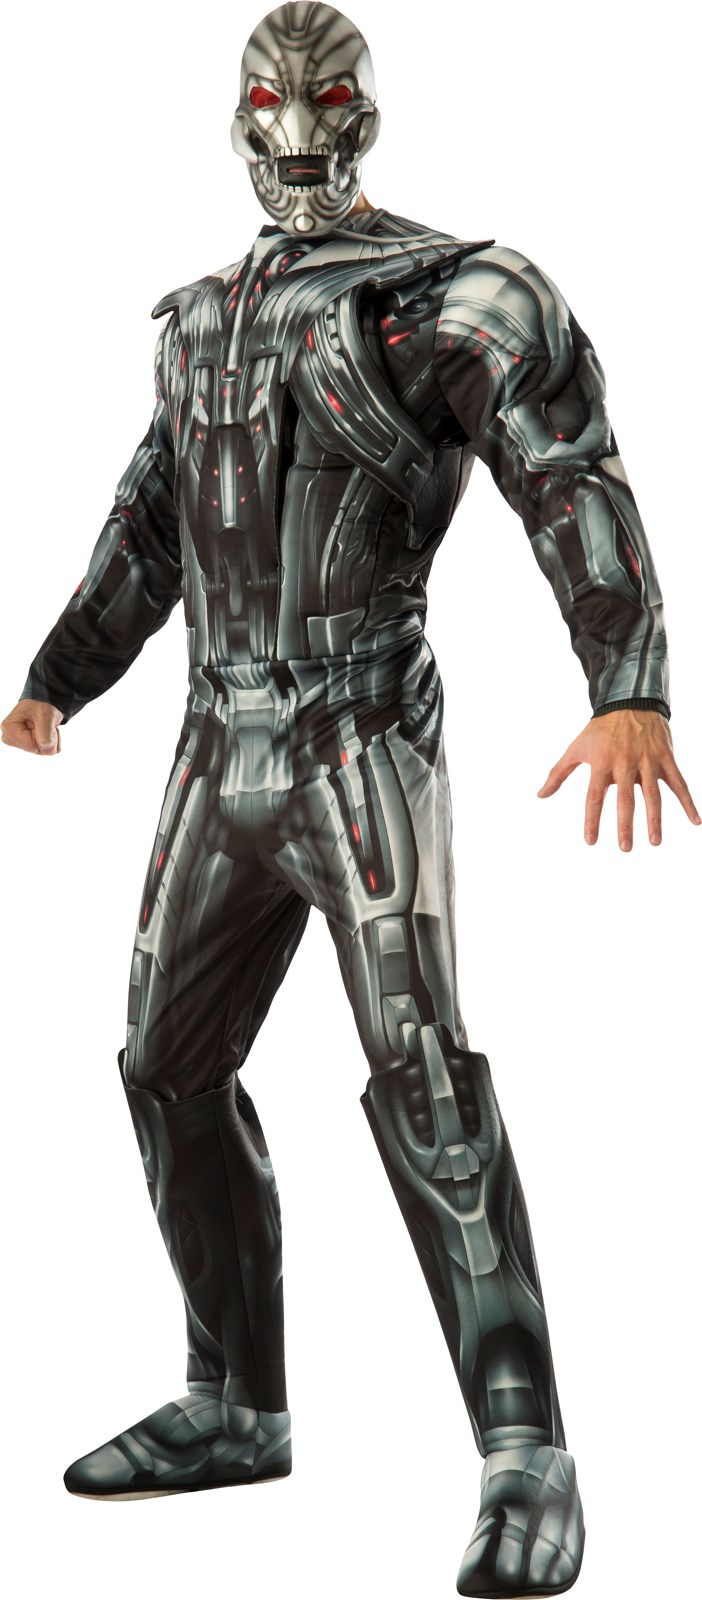 Avengers 2 - Age of Ultron: Deluxe Adult Ultron Costume